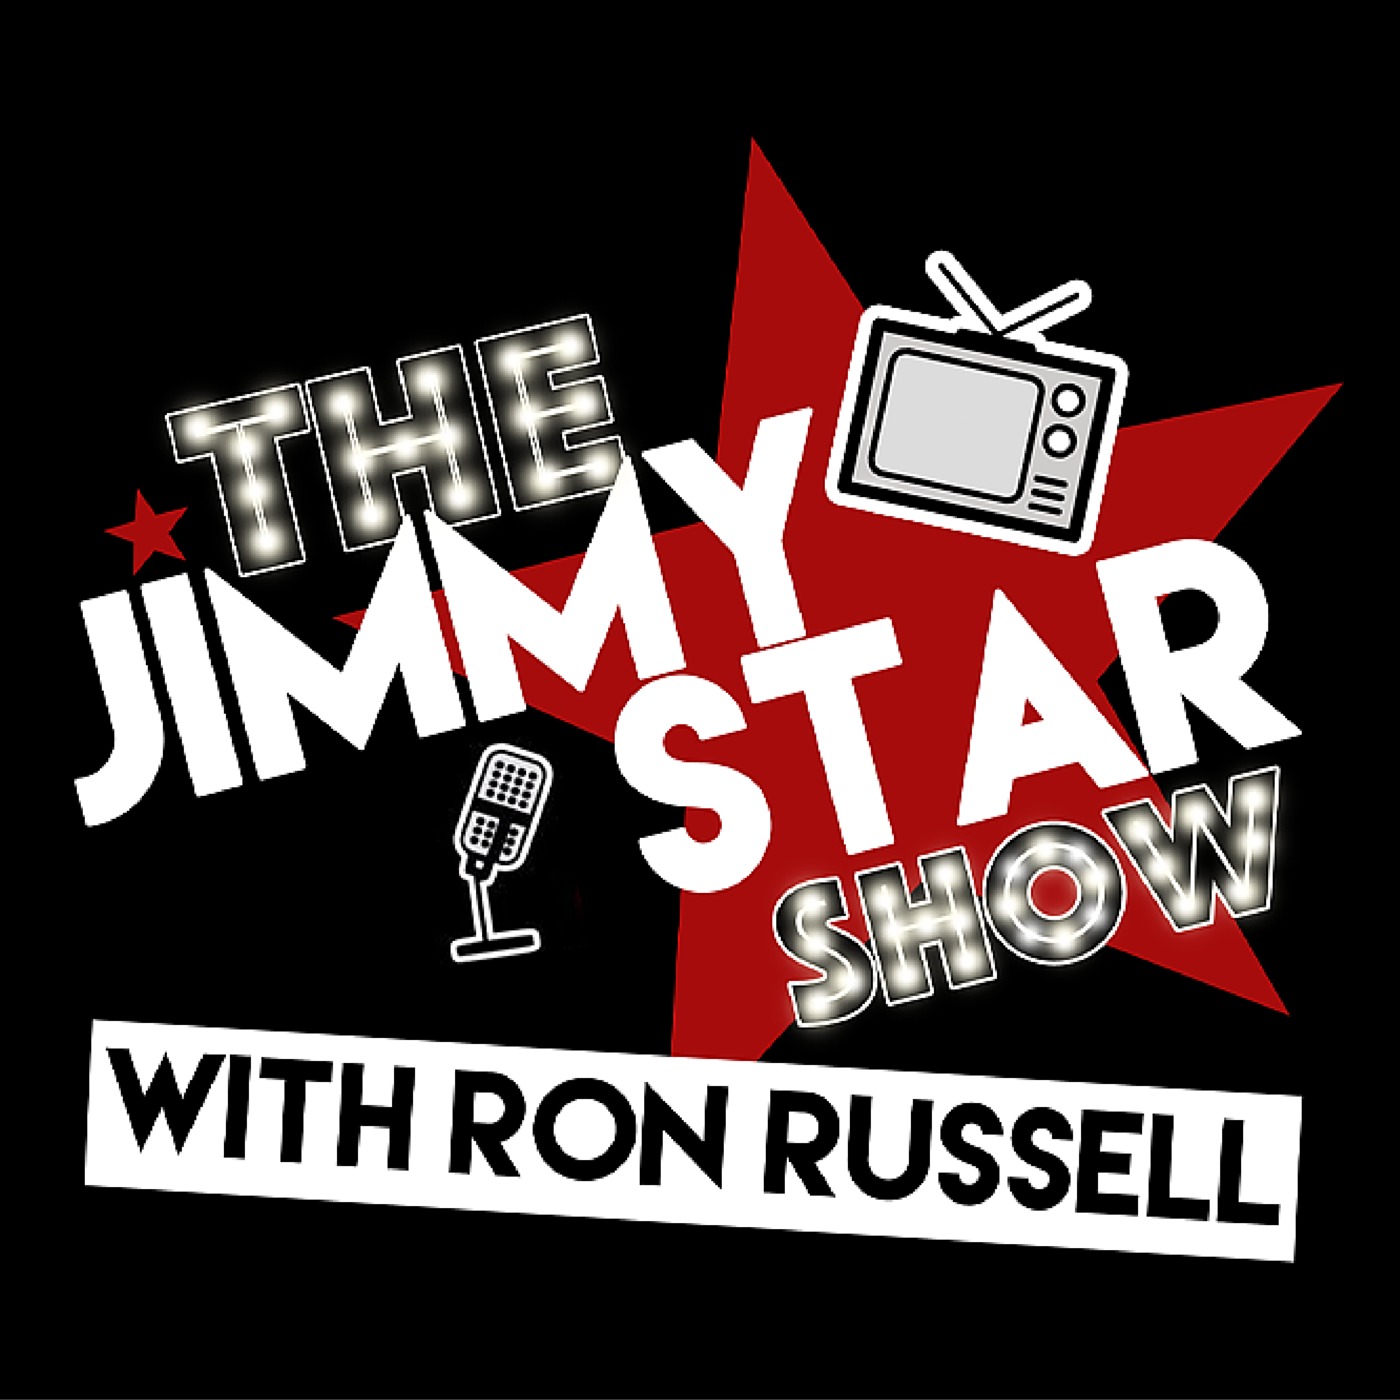 The Jimmy Star Show With Ron Russell